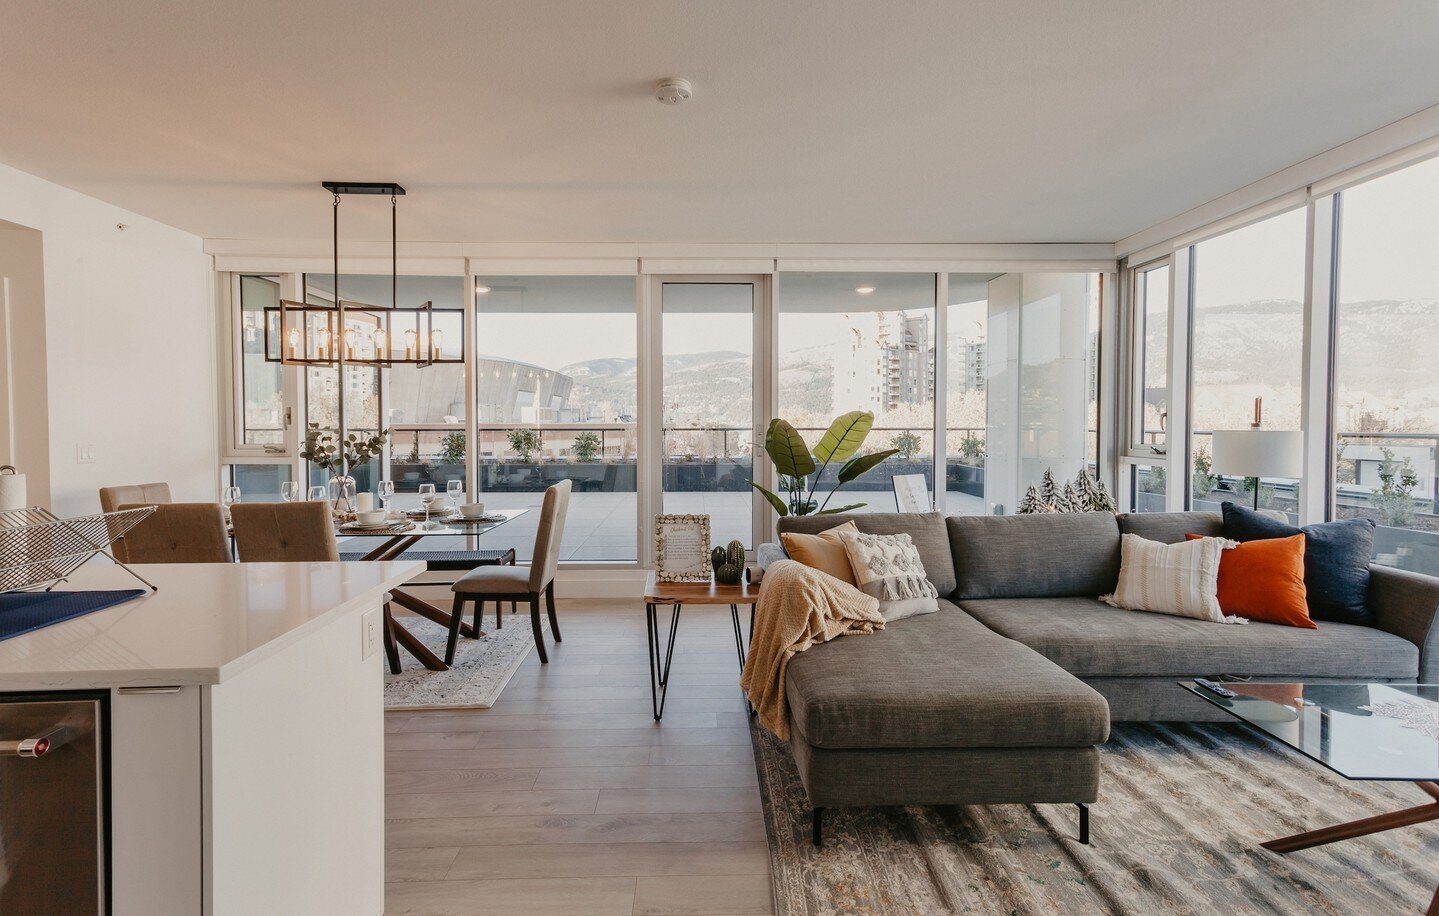 ❣️ Today, we are talking about the Modern Scandi &mdash; a 2 bedroom + den, 2 bathroom luxury condo. This unit is located in the heart of the Downtown Kelowna district, close to the parks &amp; lake and tons of restaurants! Here are some of our favou